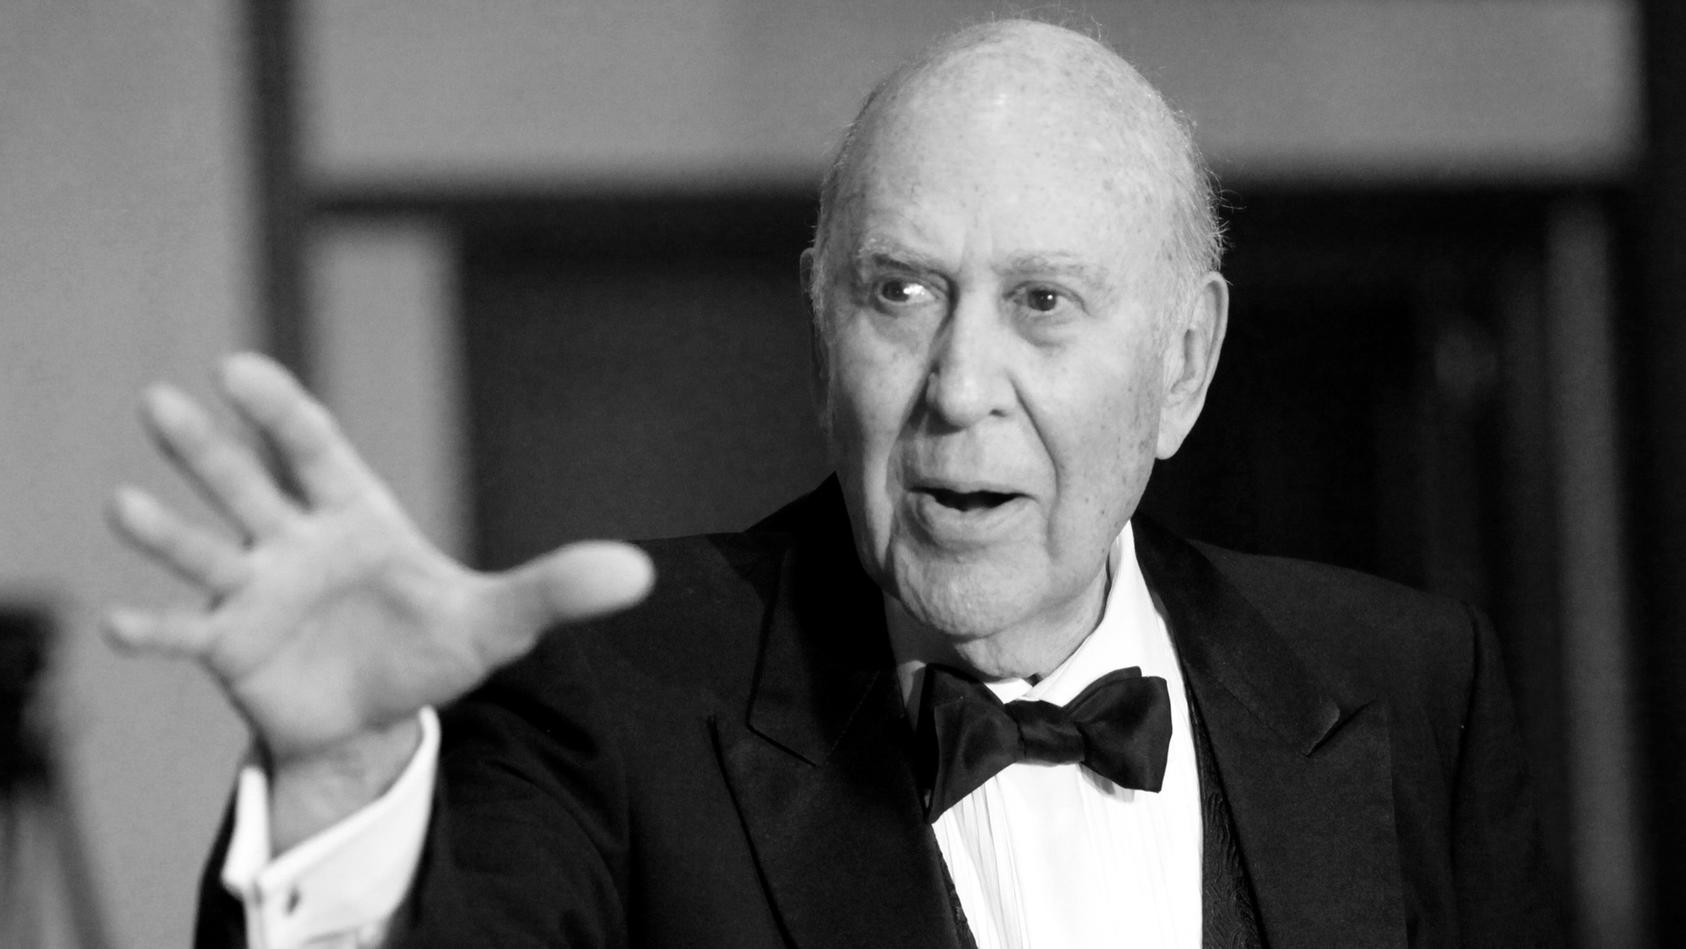 FILE PHOTO: Master of Ceremonies for the night Carl Reiner arrives at the 62nd Annual Directors Guild of America Awards in Los Angeles January 30, 2010. REUTERS/Danny Moloshok/File Photo